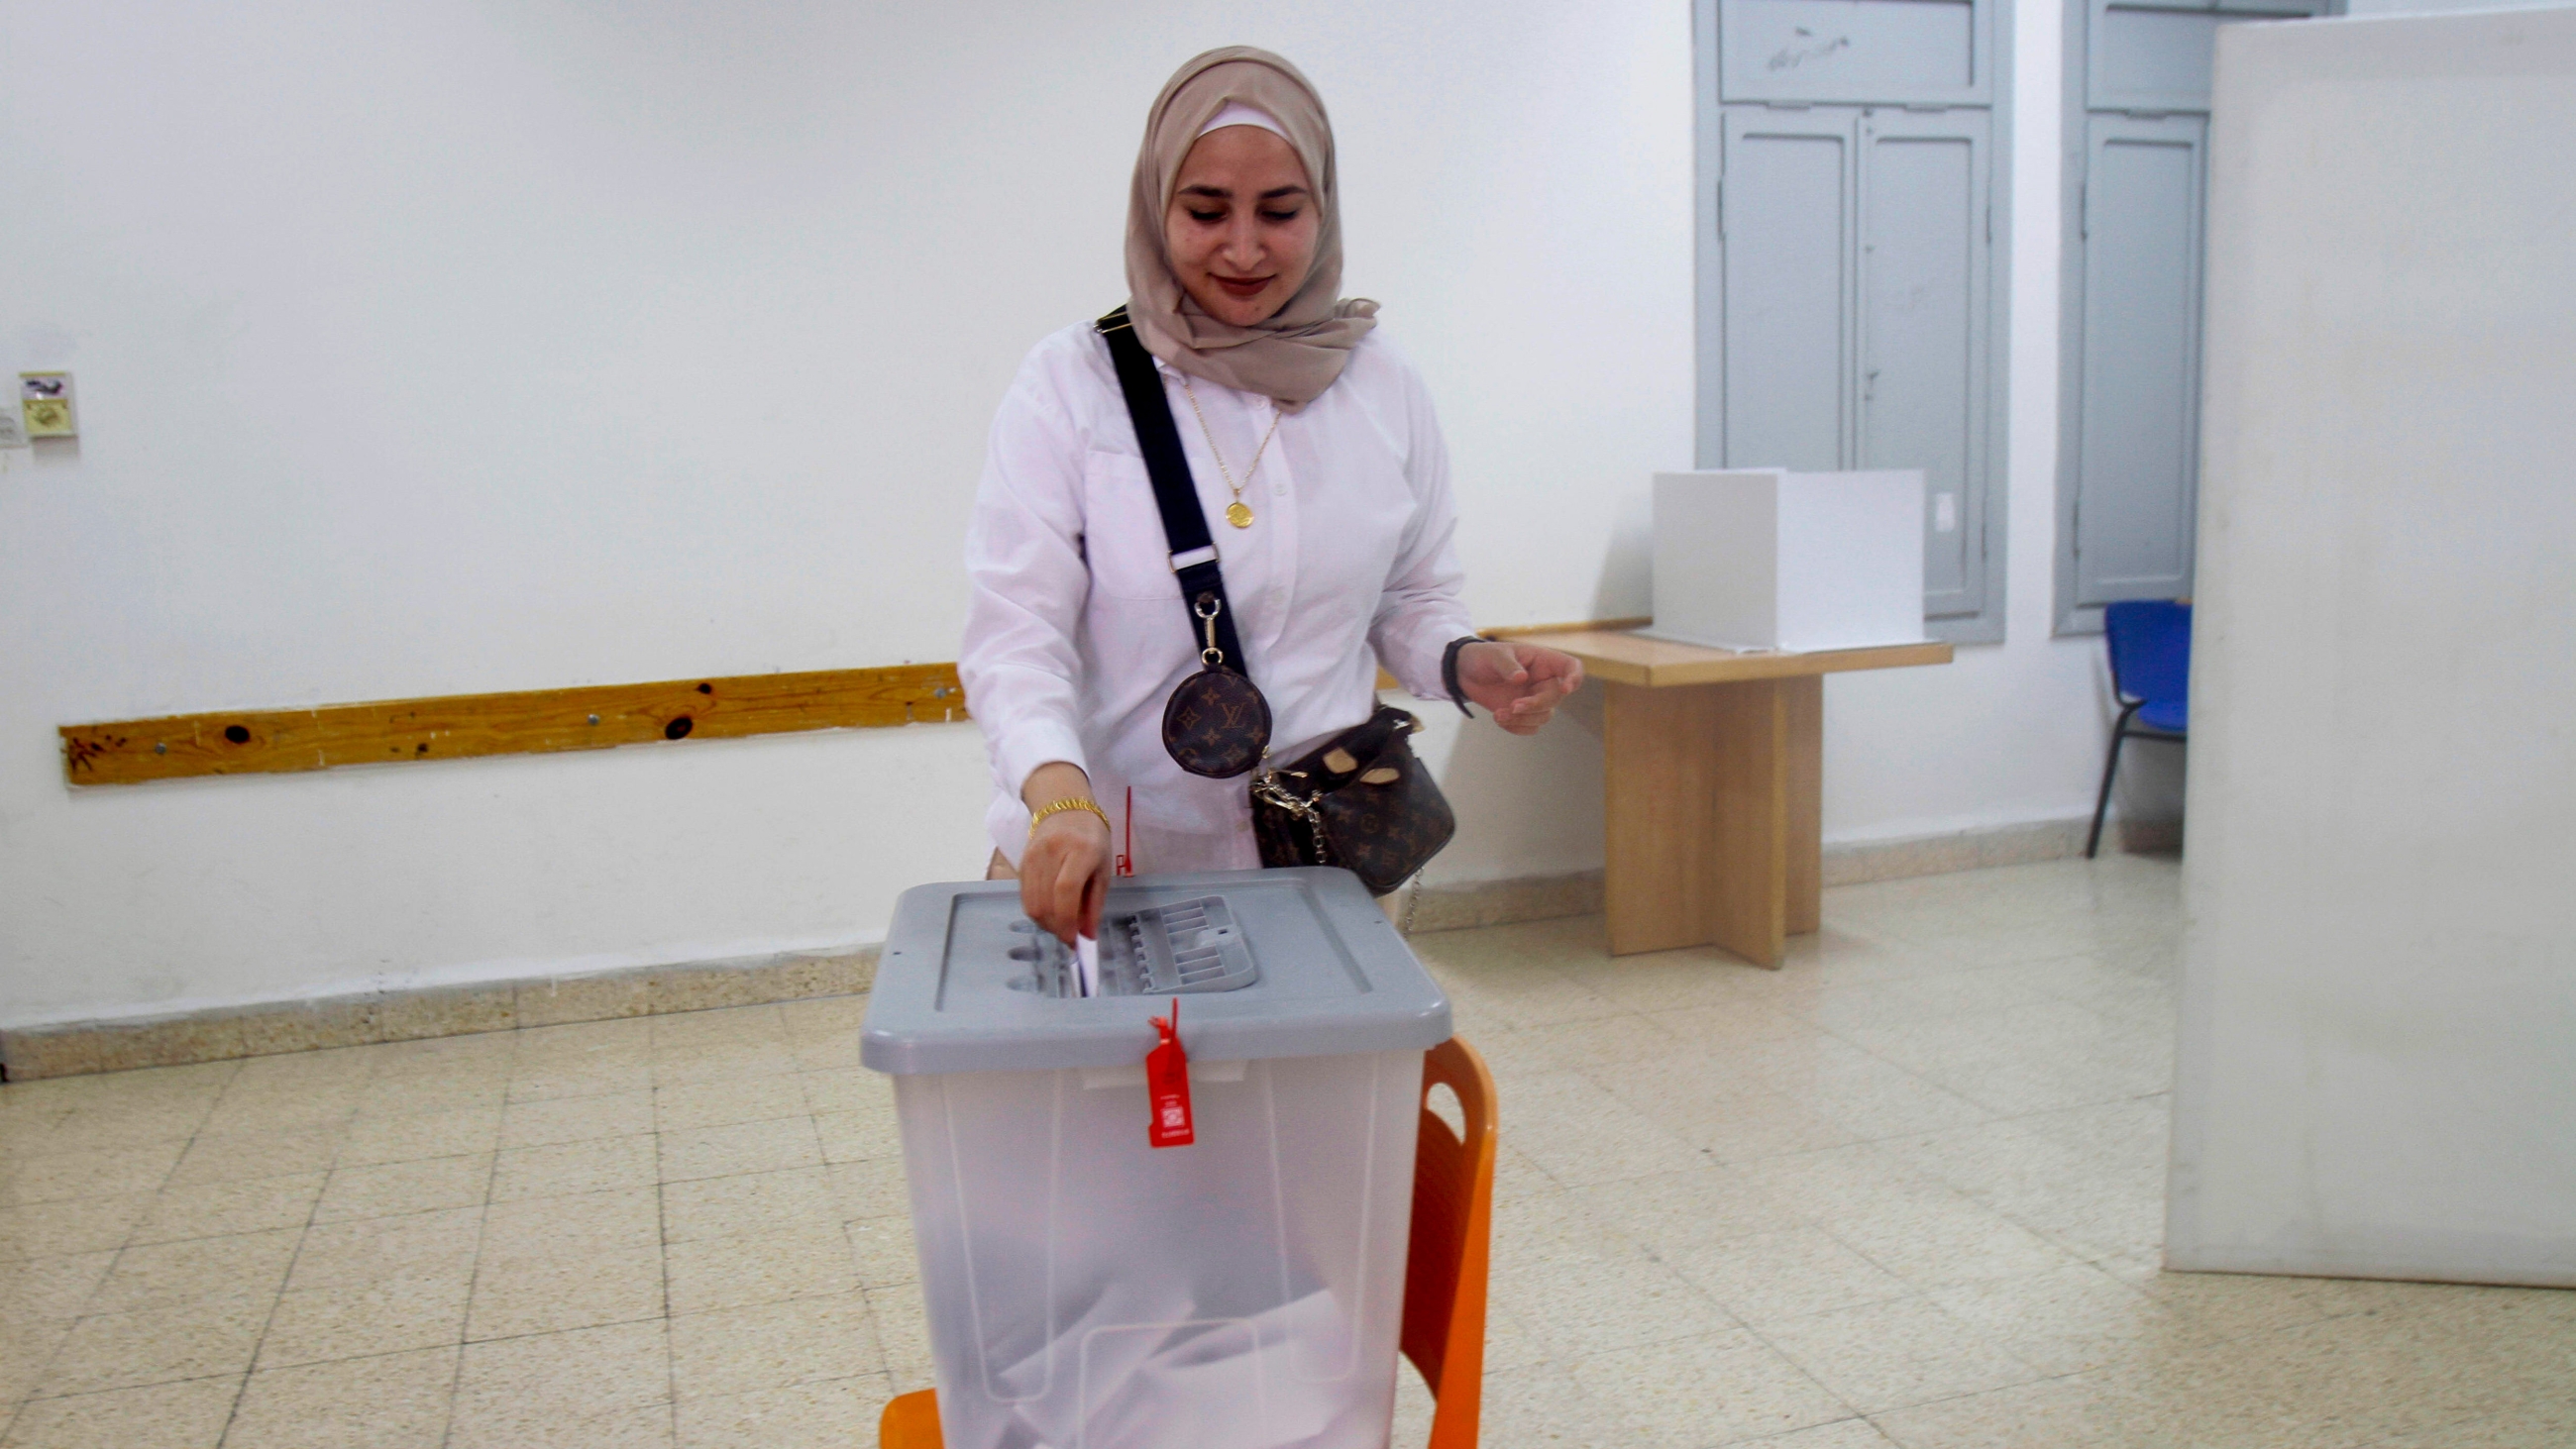 Palestinian students cast their votes in student elections at An-Najah National University in the West Bank city of Nablus on 16 May 2023 (Imago Images via Reuters)